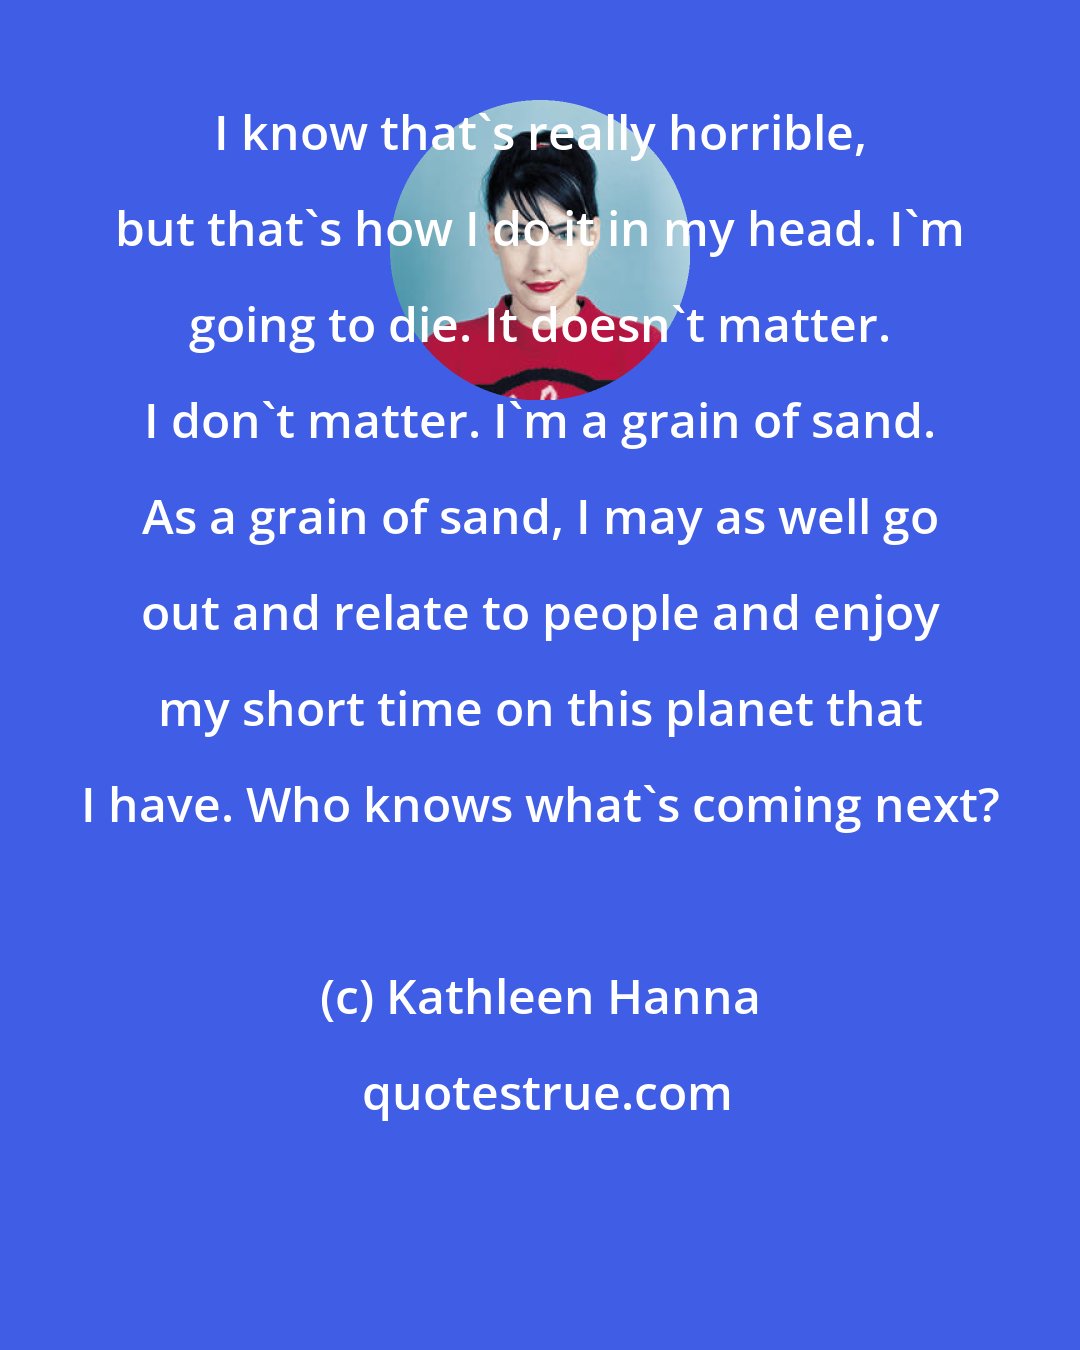 Kathleen Hanna: I know that's really horrible, but that's how I do it in my head. I'm going to die. It doesn't matter. I don't matter. I'm a grain of sand. As a grain of sand, I may as well go out and relate to people and enjoy my short time on this planet that I have. Who knows what's coming next?